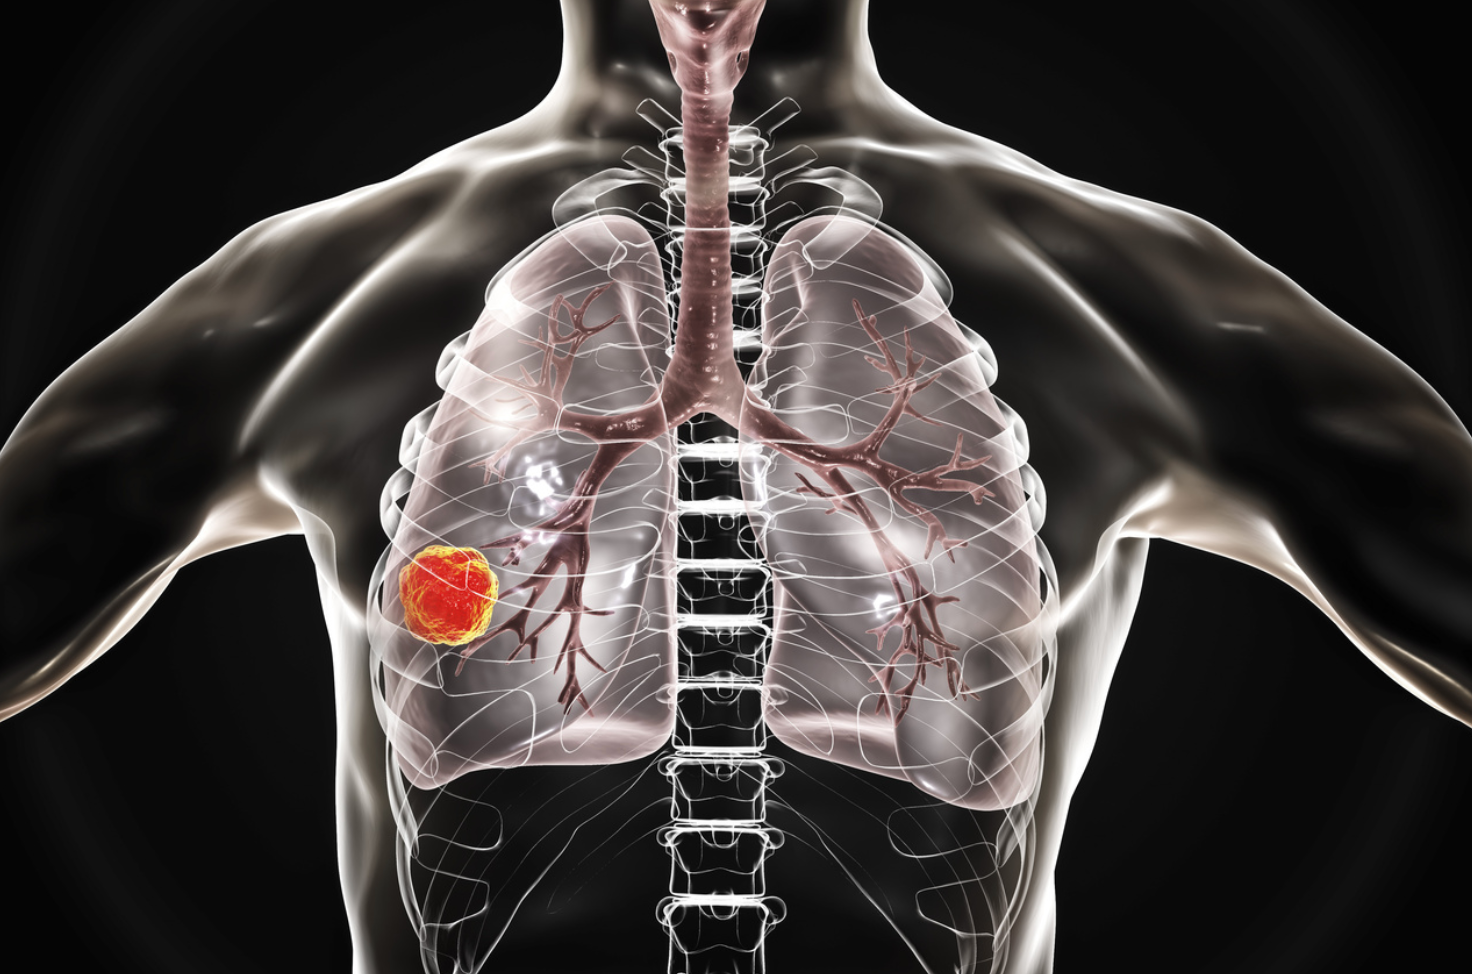 Sotorasib Granted FDA Priority Review for Non-Small Cell Lung Cancer